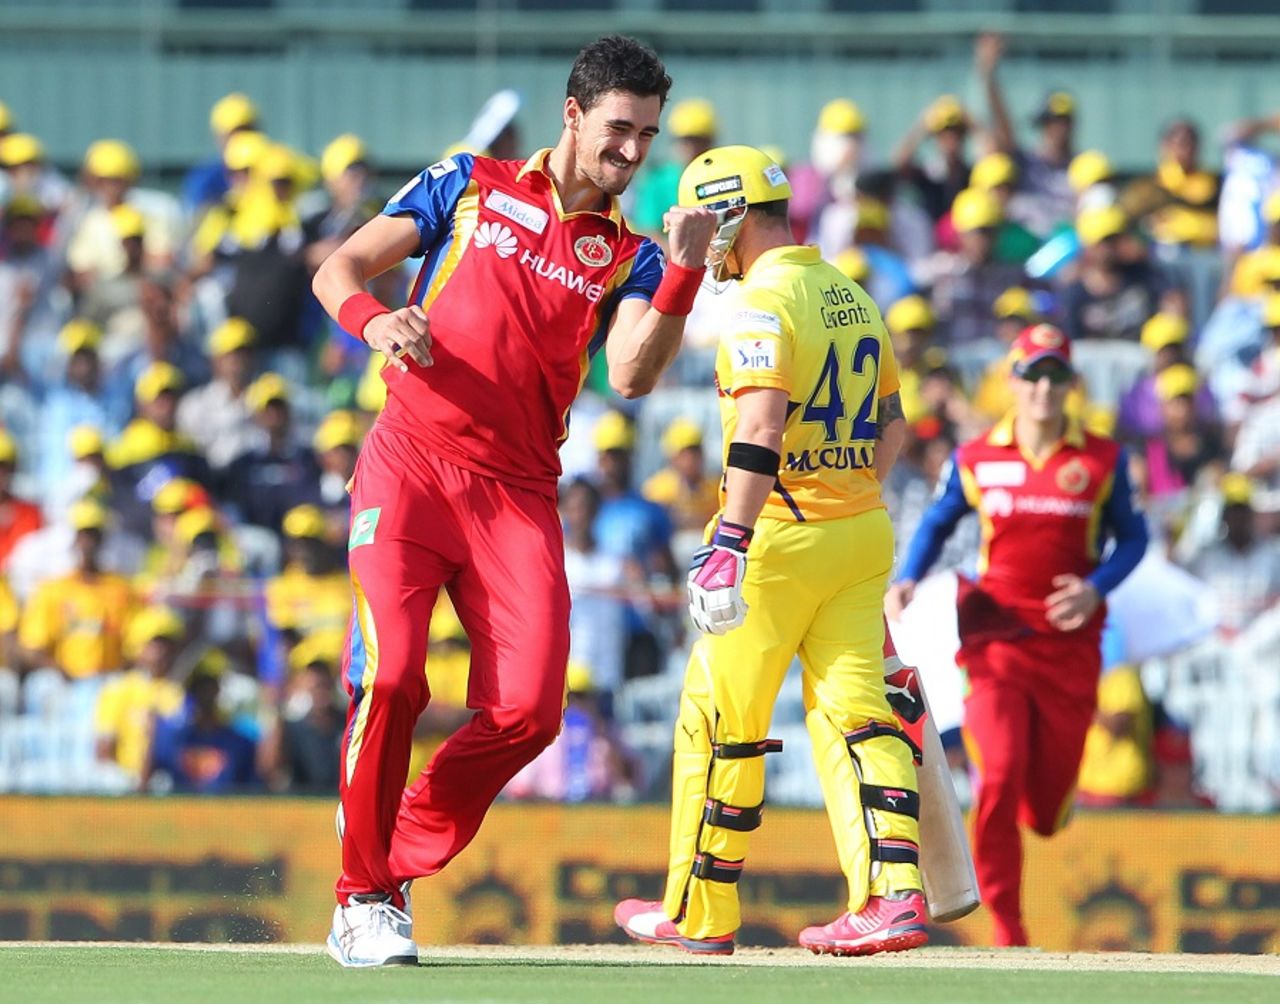 Mitchell Starc exults after bowling Dwayne Smith for a duck, Chennai Super Kings v Royal Challengers Bangalore, IPL 2015, Chennai, May 4, 2015